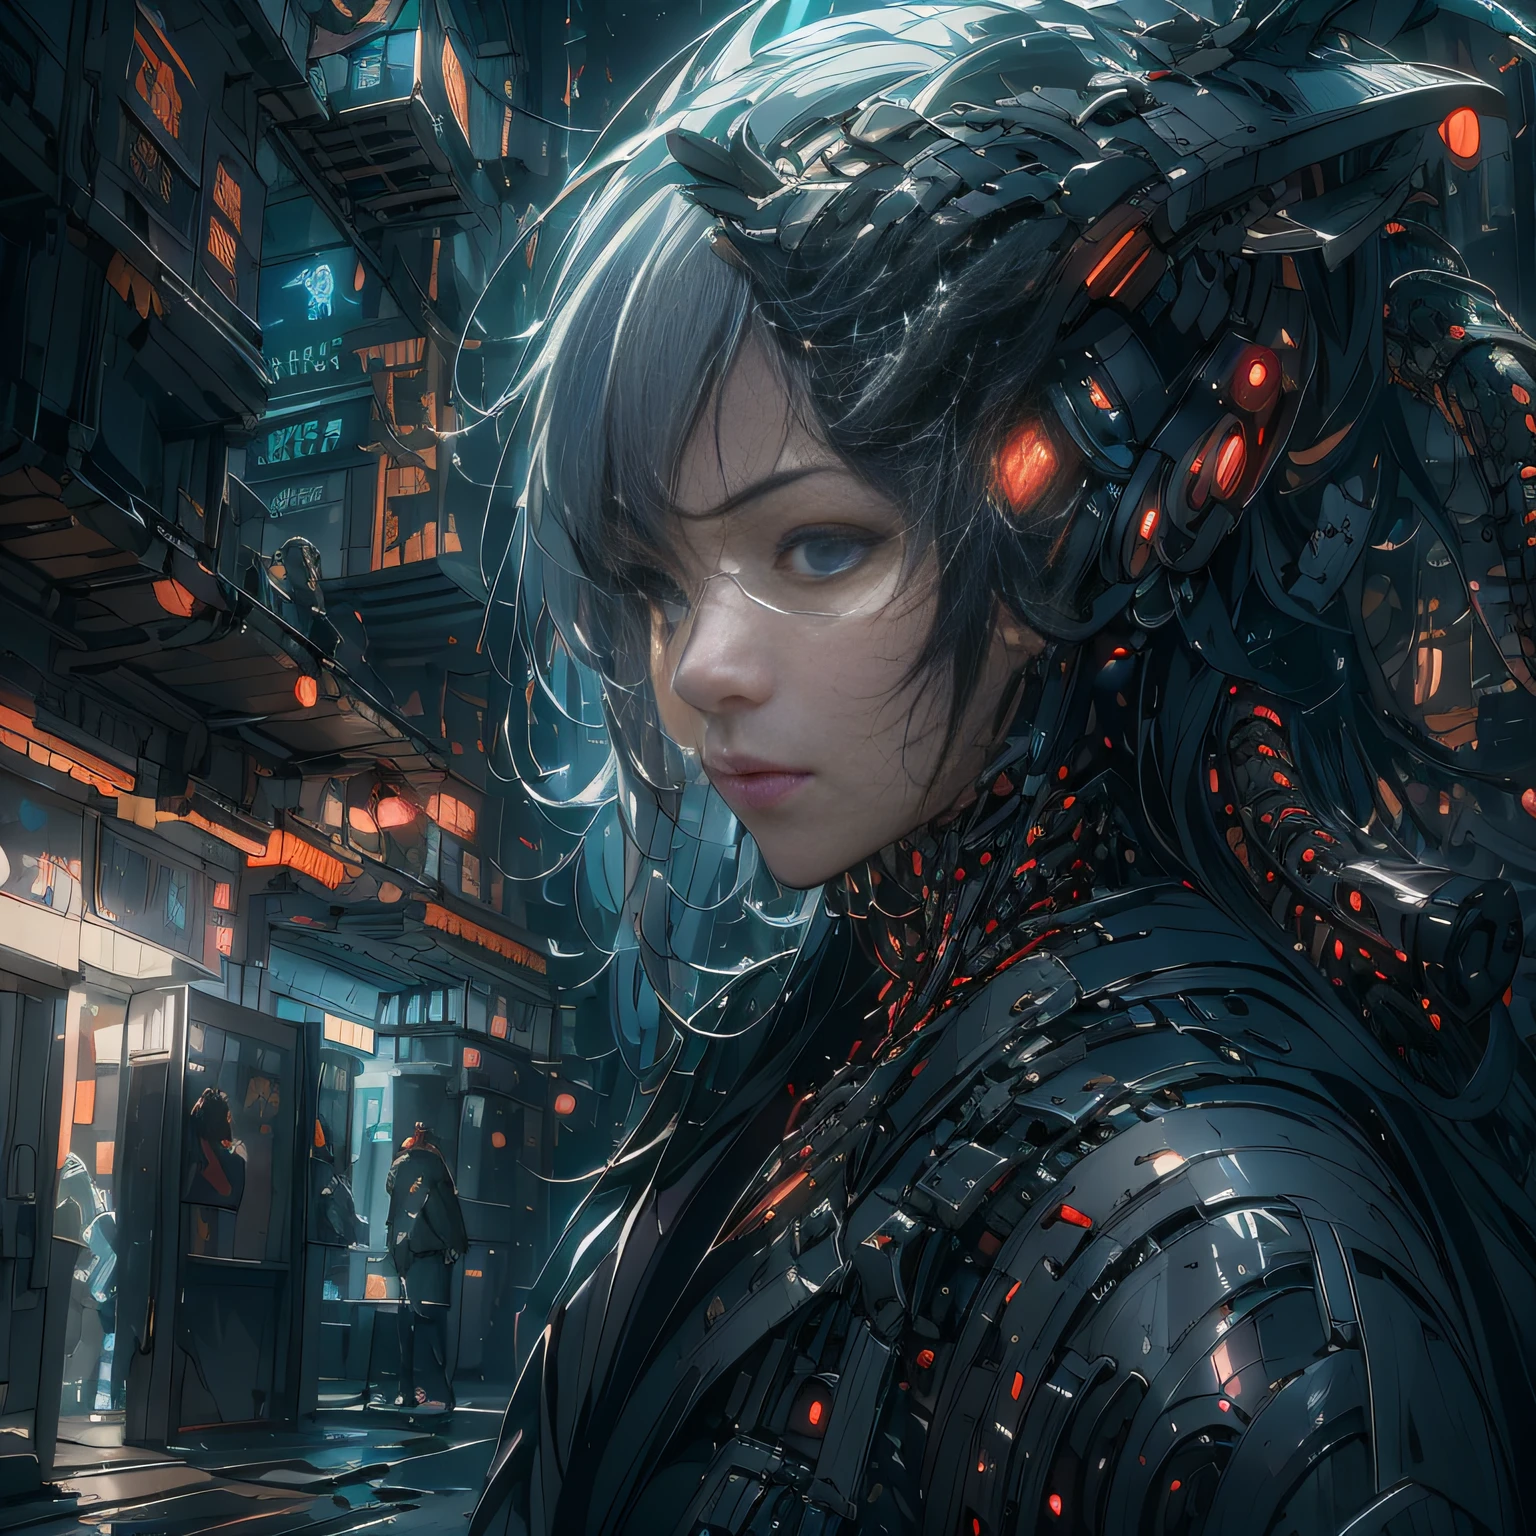 （（A futuristic））， （（myth））， （（fanciful）），Machinary，1girll， Cyberpunk urban environment， gray-haired girl，Avant-garde clothing， （Surrounded by mechanical Asian dragons：1.5）， Mechanical dragon，（neonlight：1.2）， （cybernetically enhanced：1.1）， （Fine dragon scales：1.1）， （action-packed scene：1.2）， （cinematic compositions：1.1）， Mixed media artwork， 8K resolution，best qualtiy，lightand shade contrast，Unreal 5，